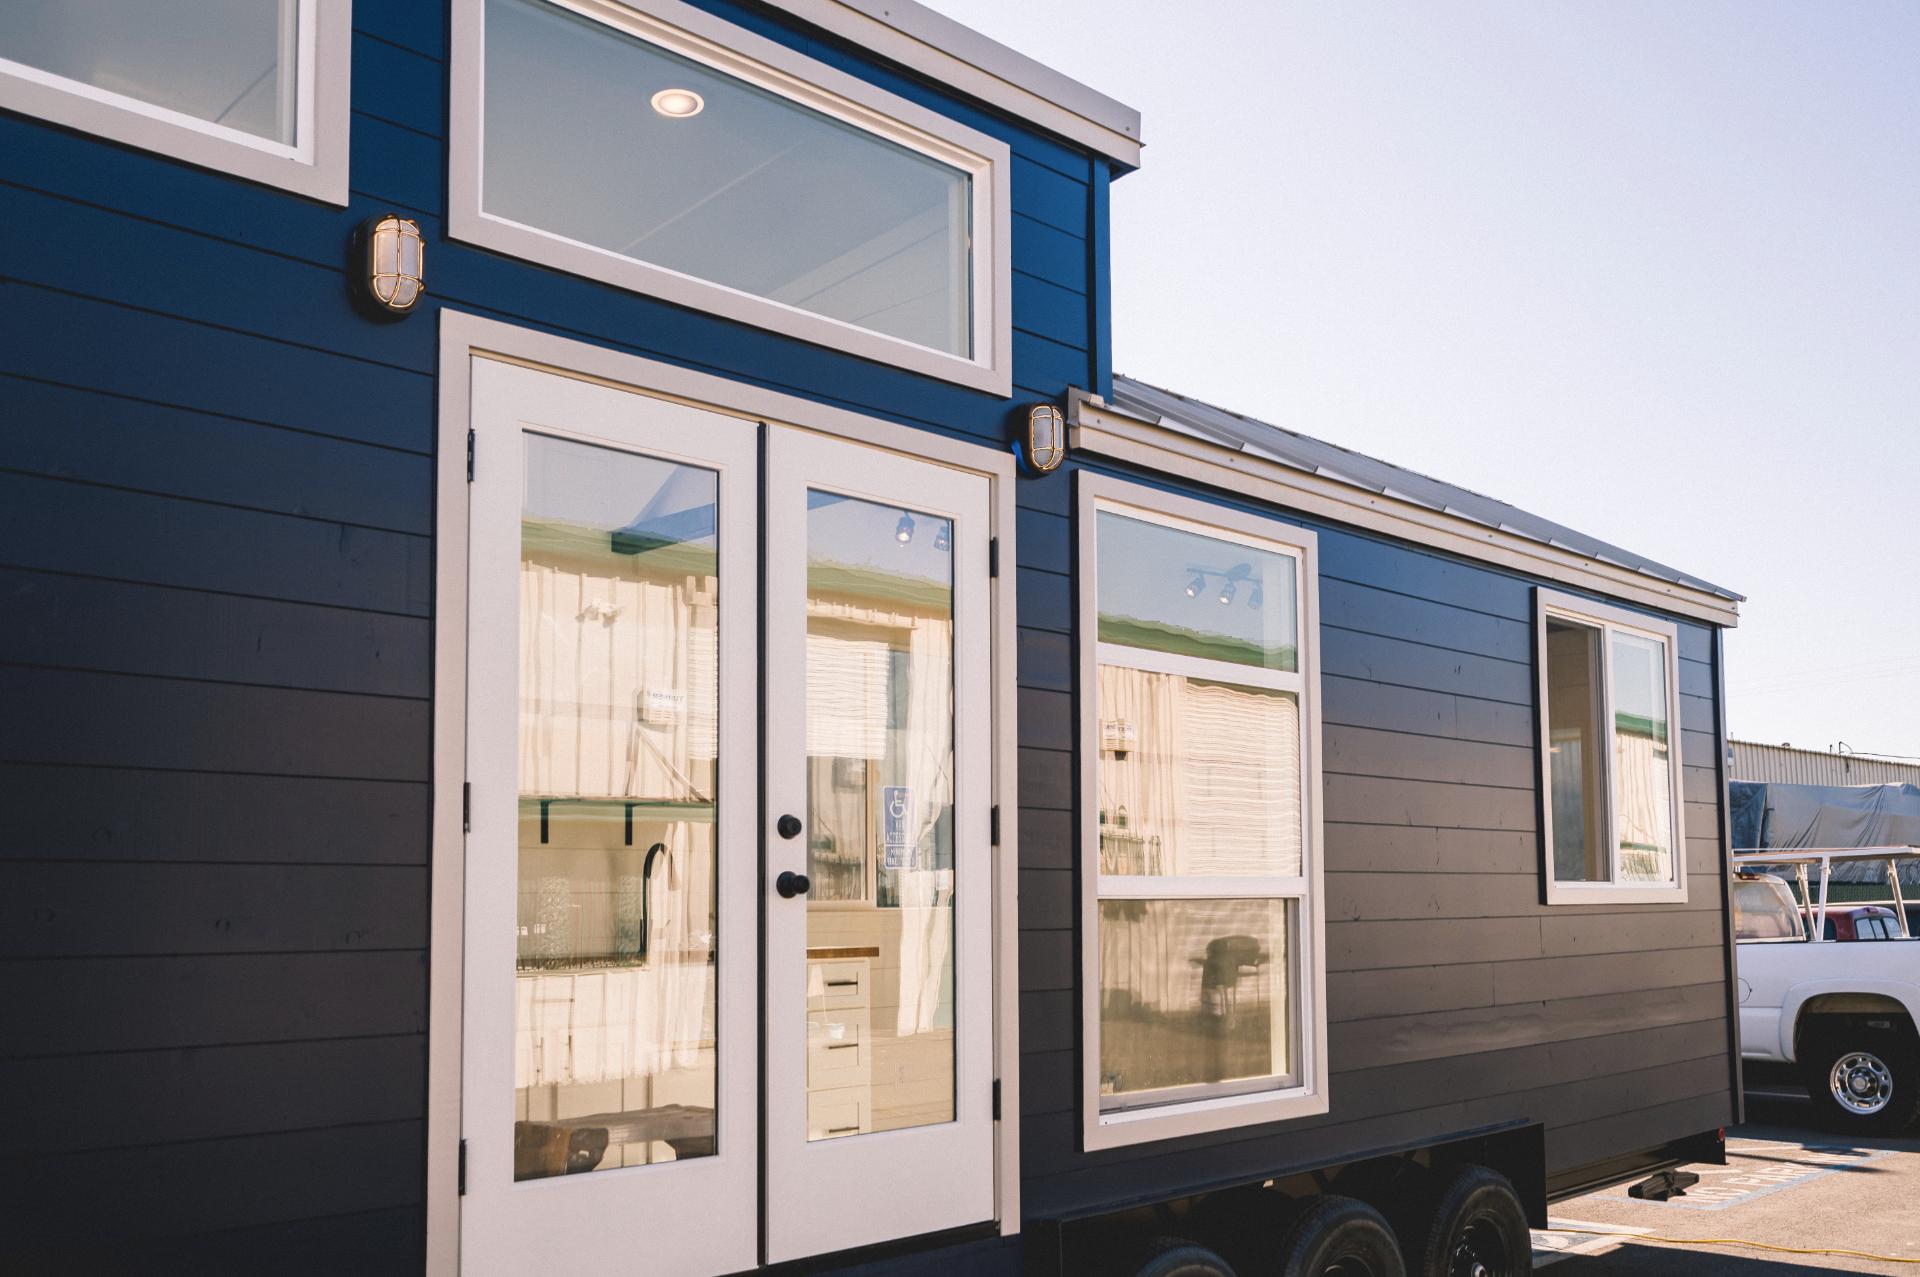 Double Full Light Front Doors - Gallery 30 by California Tiny House